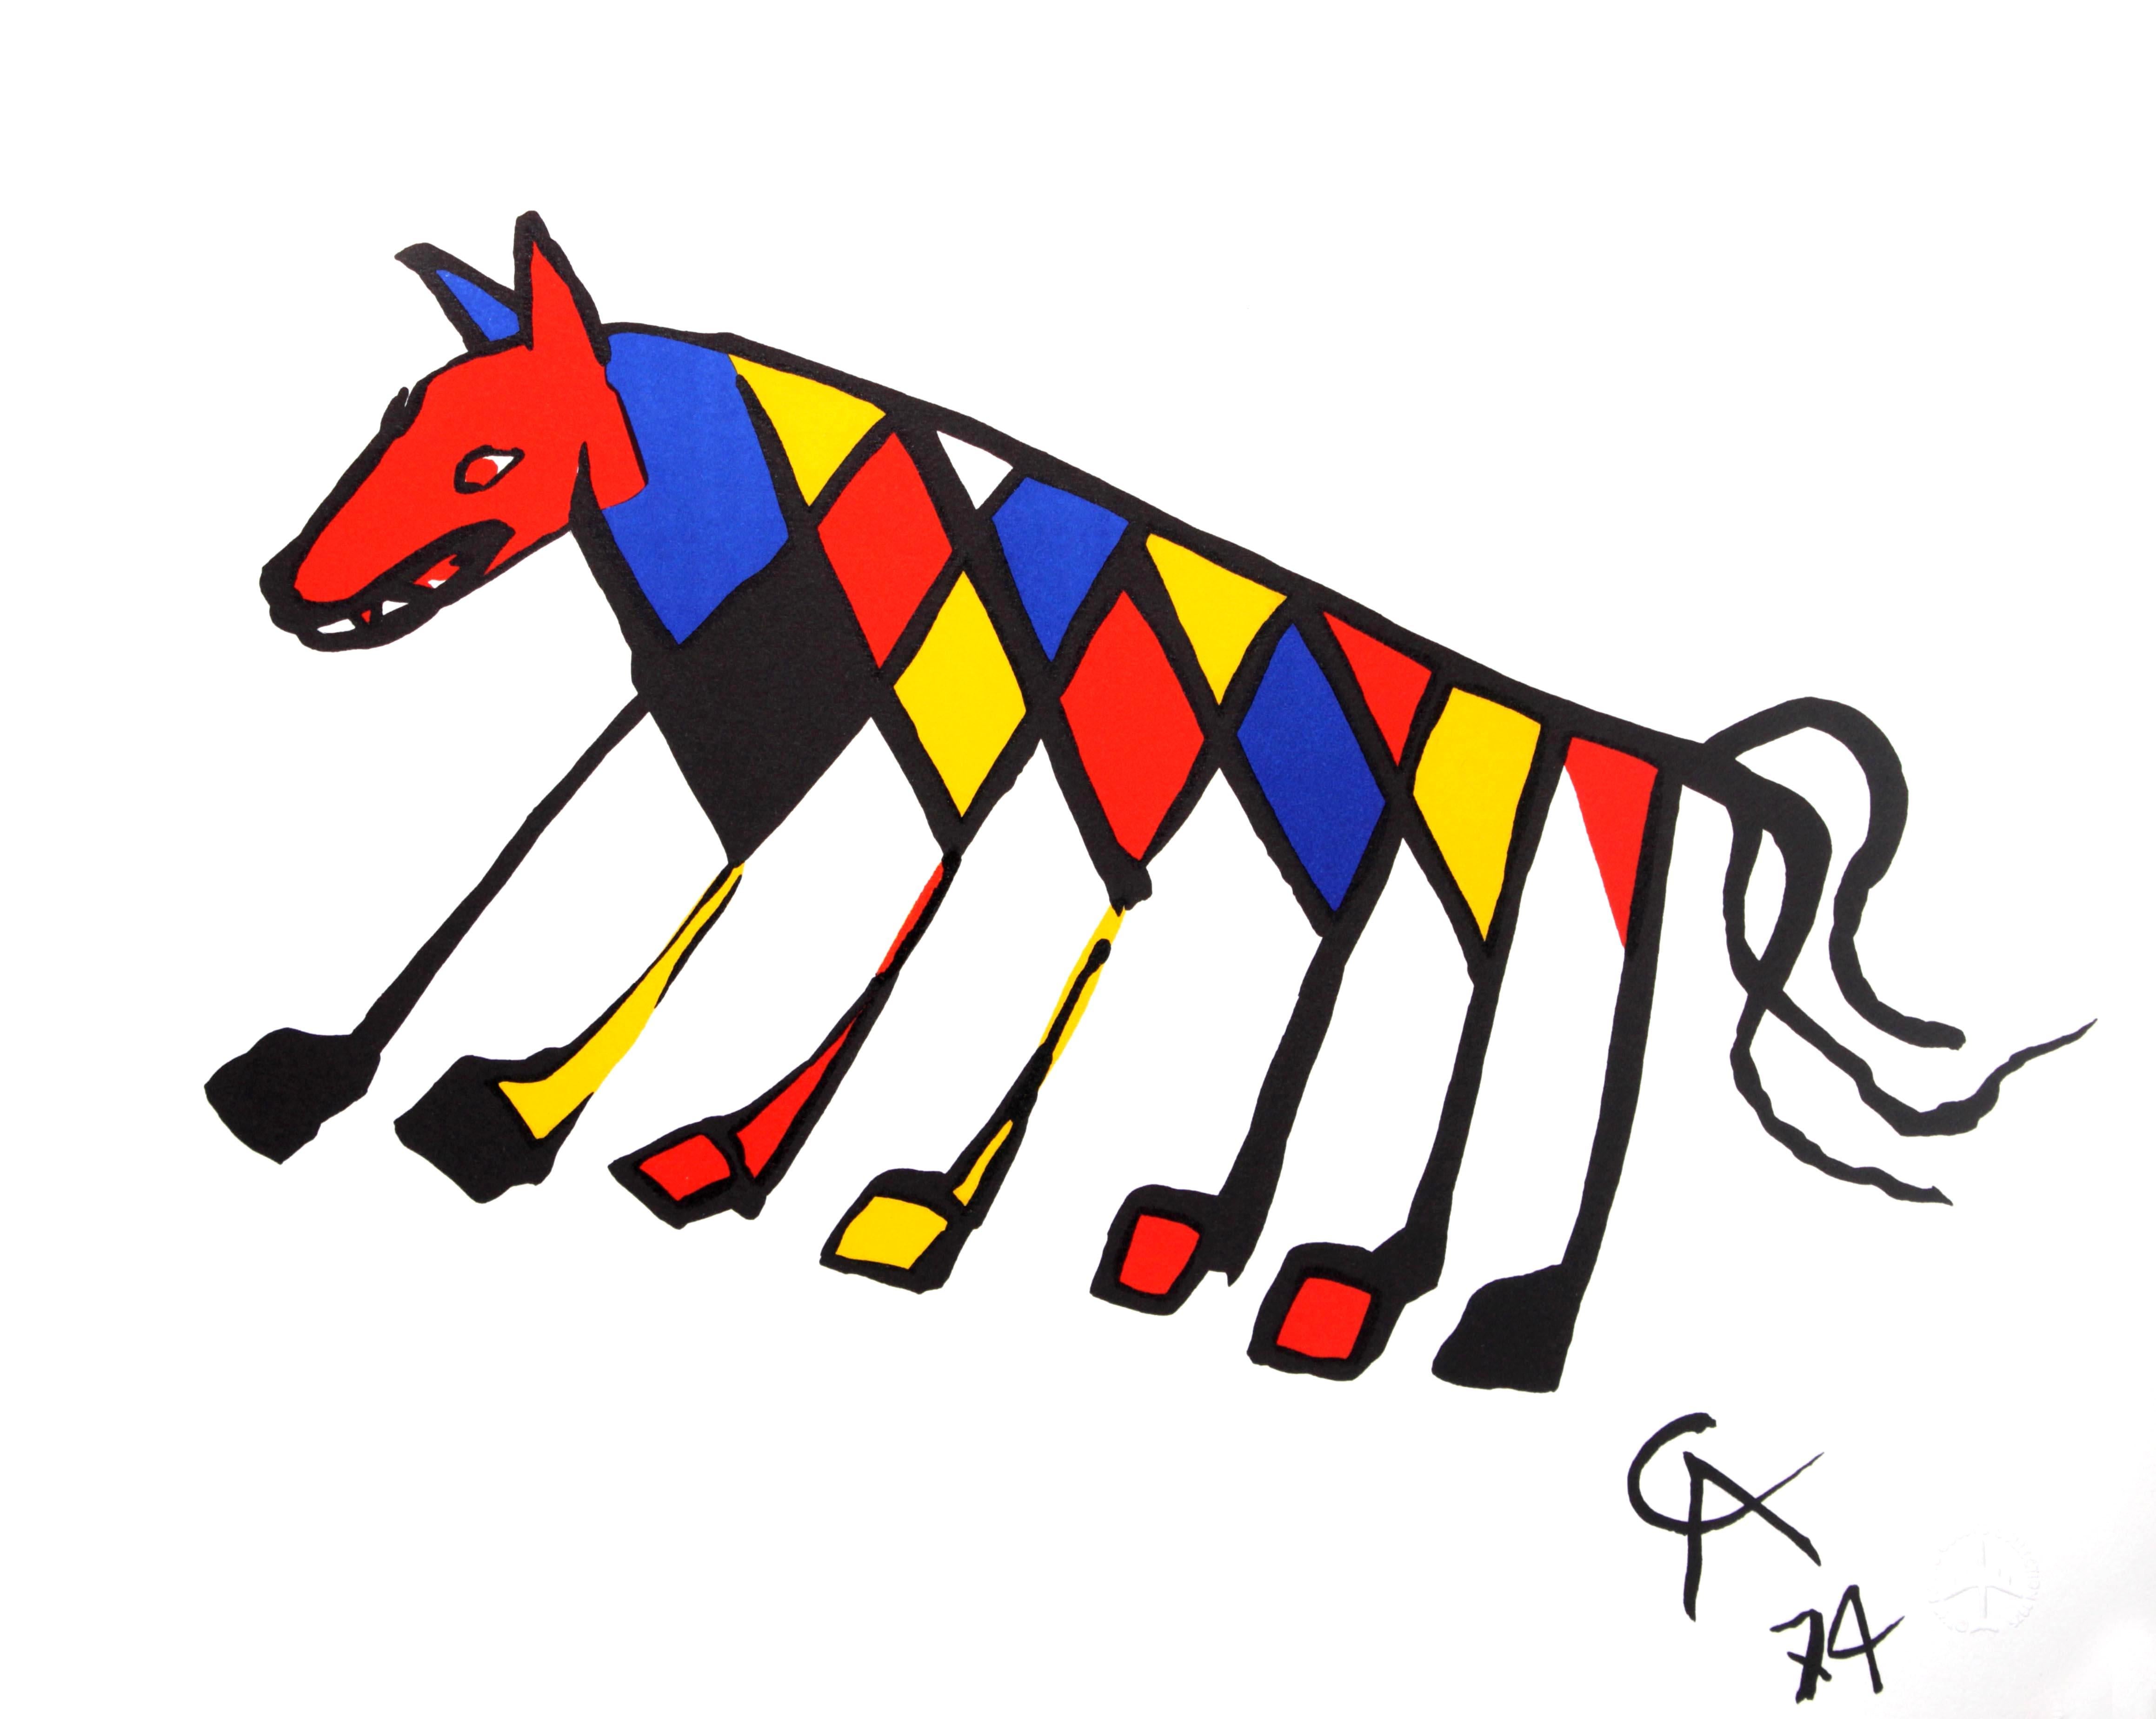 Artist: Alexander Calder
Title: Beastie
Year: 1974
Dimensions: 20in. by 26in.
Edition: From the rare limited edition
Suite: The Flying Colors Collection
Medium: Original lithograph on Arches wove paper
Condition: Mint
Signature Details: Signed in